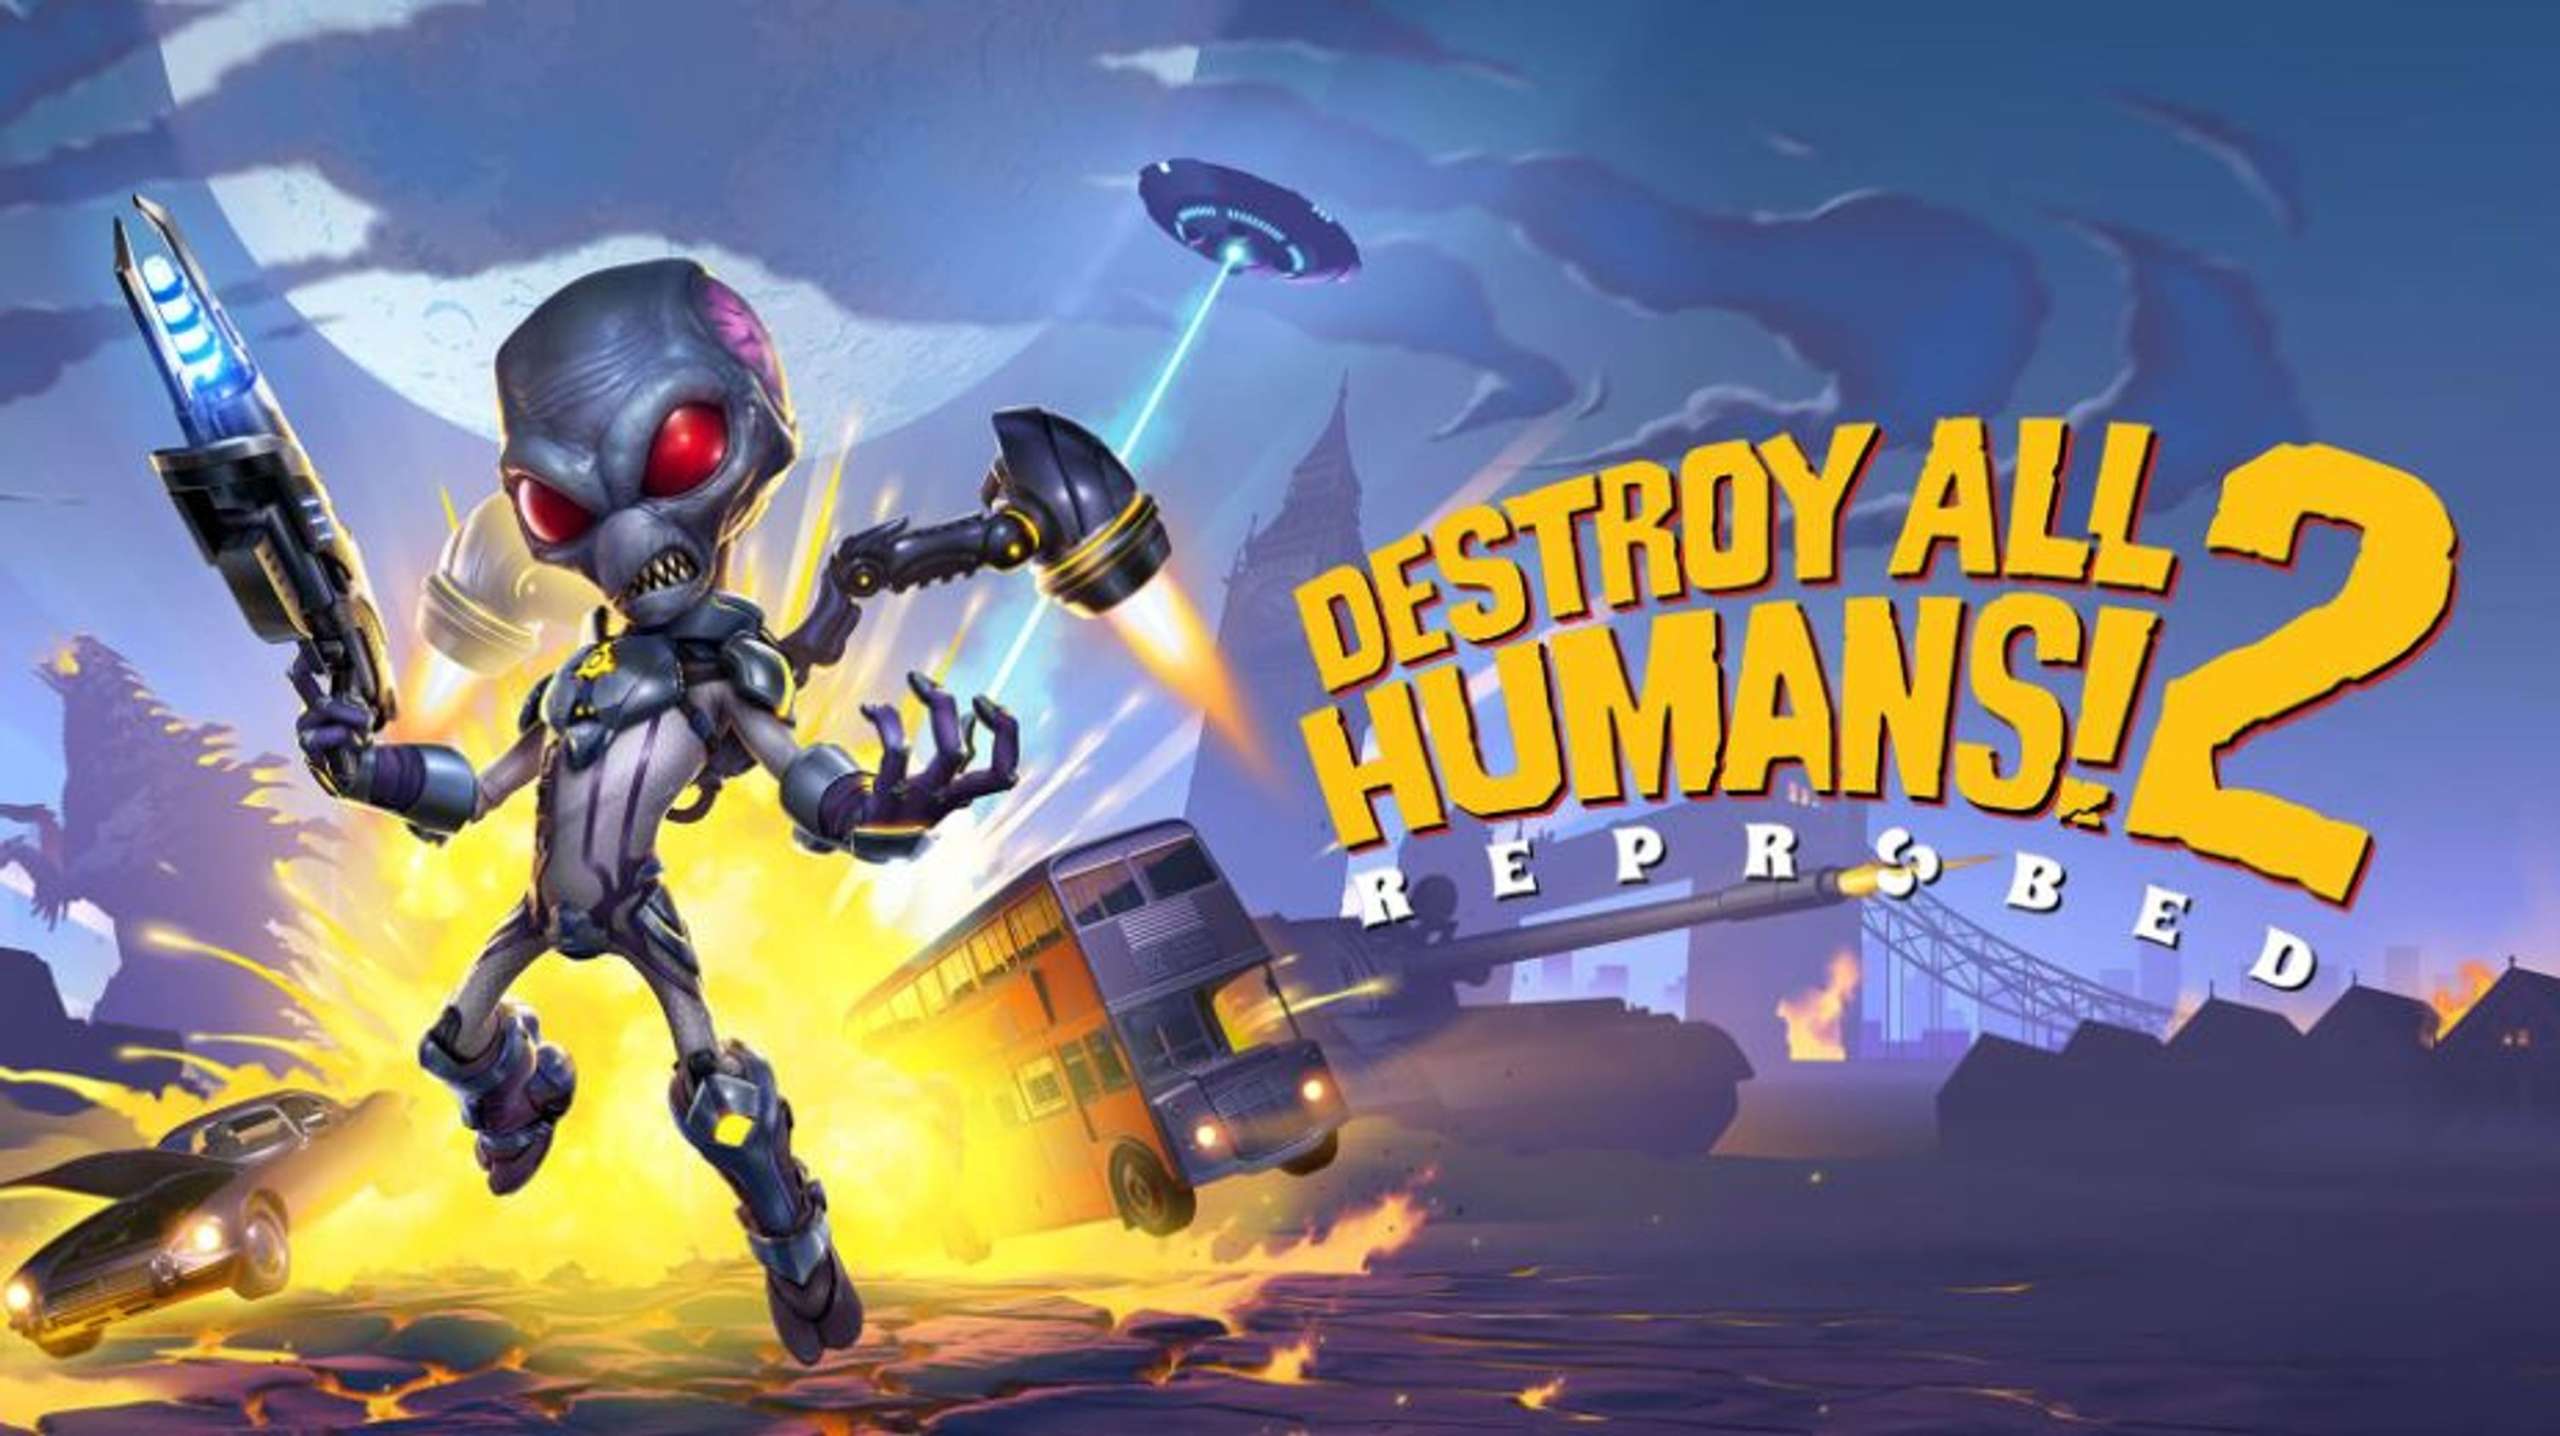 The New Trailer For Destroy All Humans! 2 Reprobed Showed A Vast Arsenal Of Alien Weapons